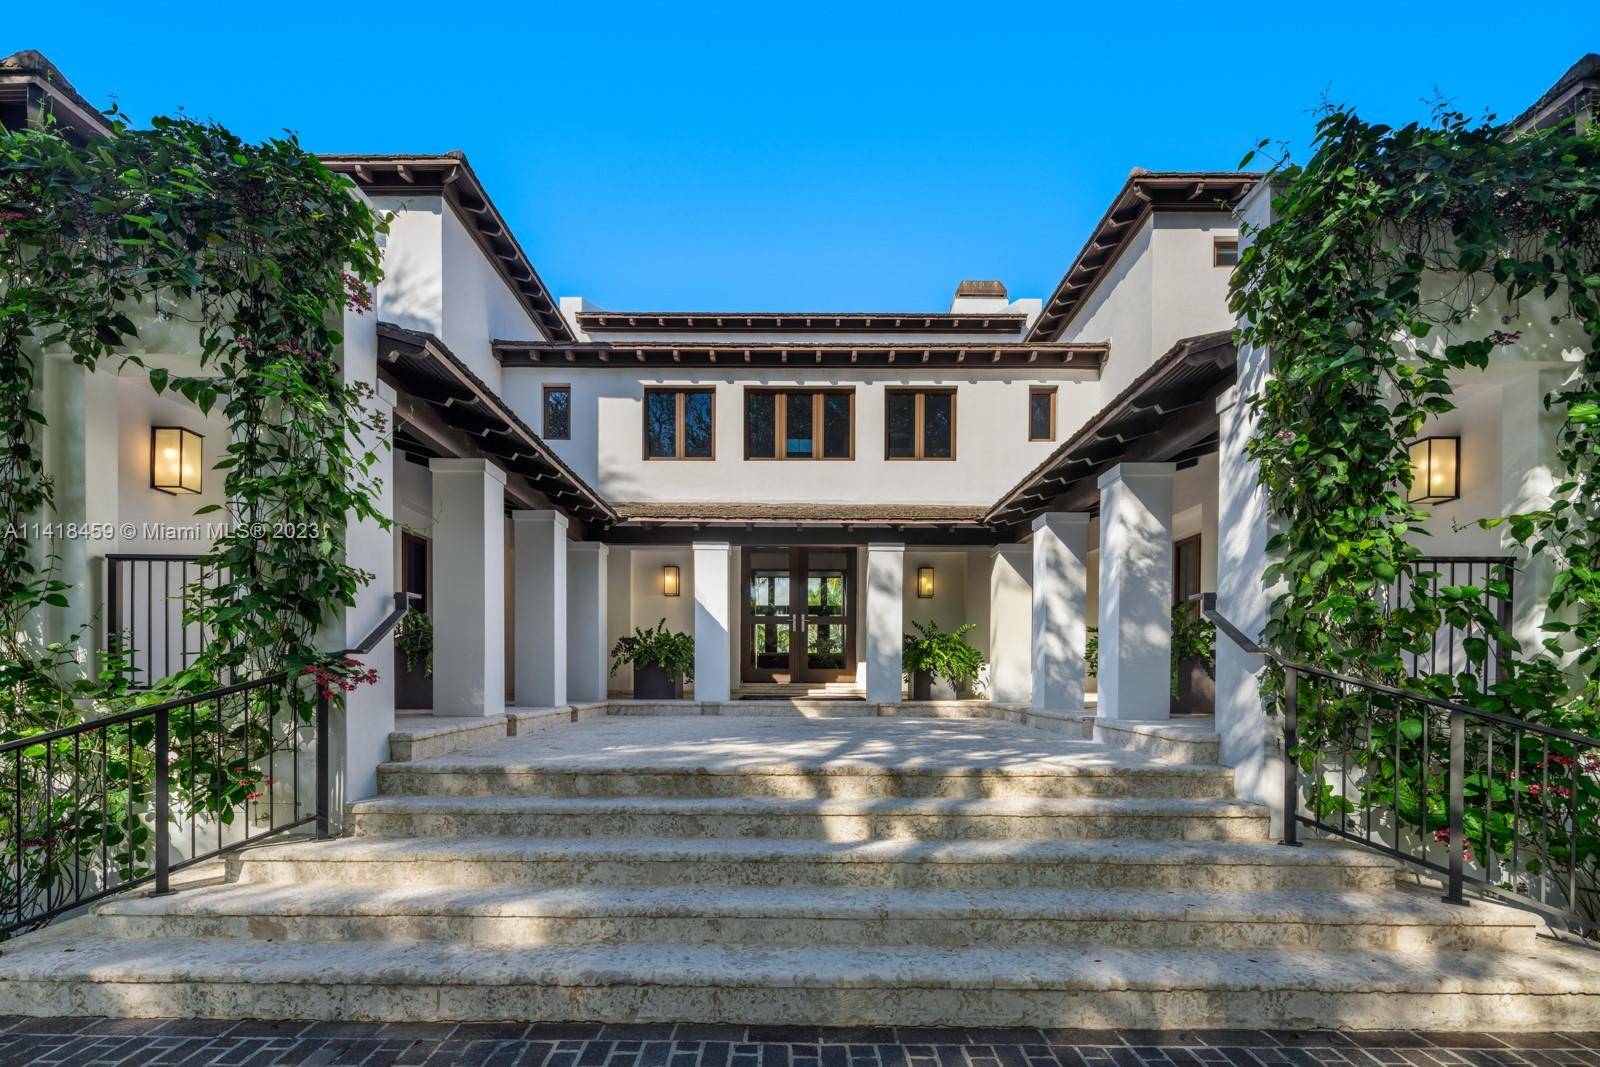 From the moment of arrival, a balance between grandiose architectural elements and thoughtful details set the tone for this unparalleled Estate.